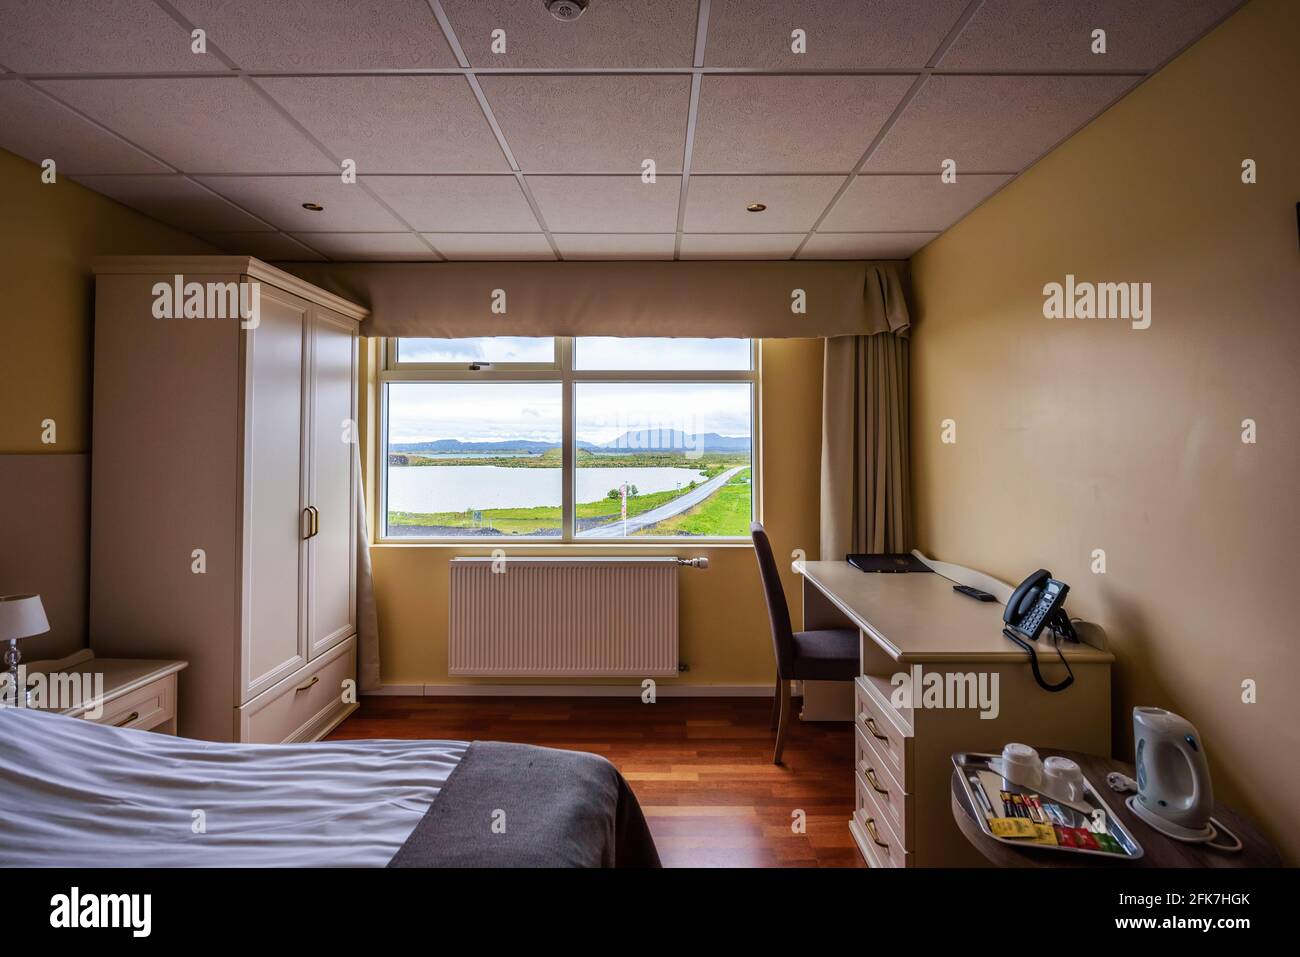 Interior of a room in Hotel Myvatn located near the Ring Road in Iceland Stock Photo